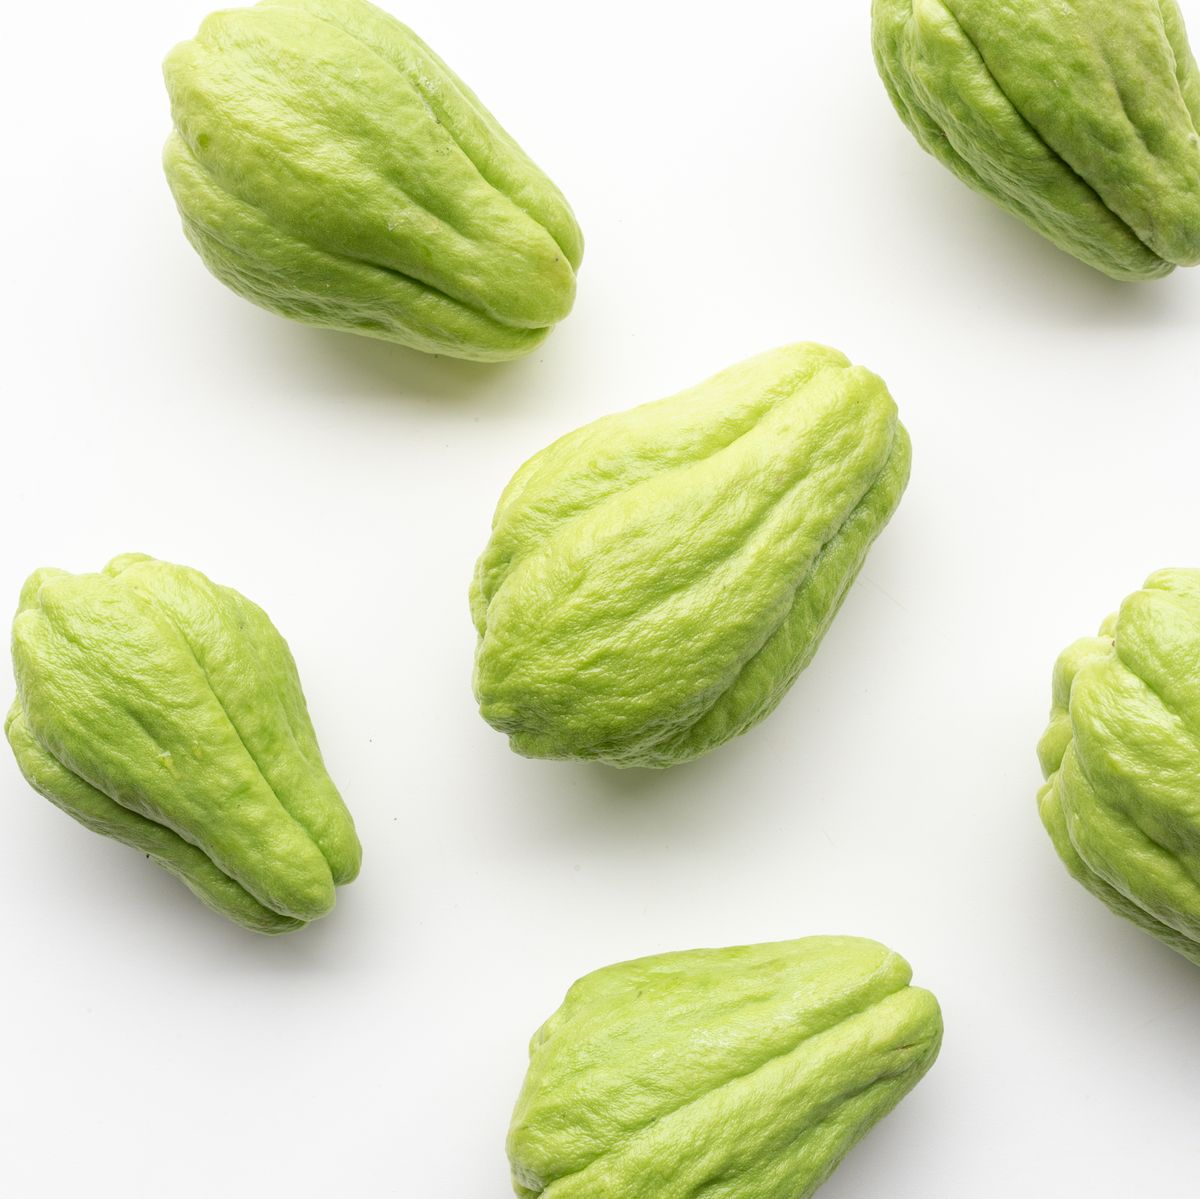 Chayote on white background from above